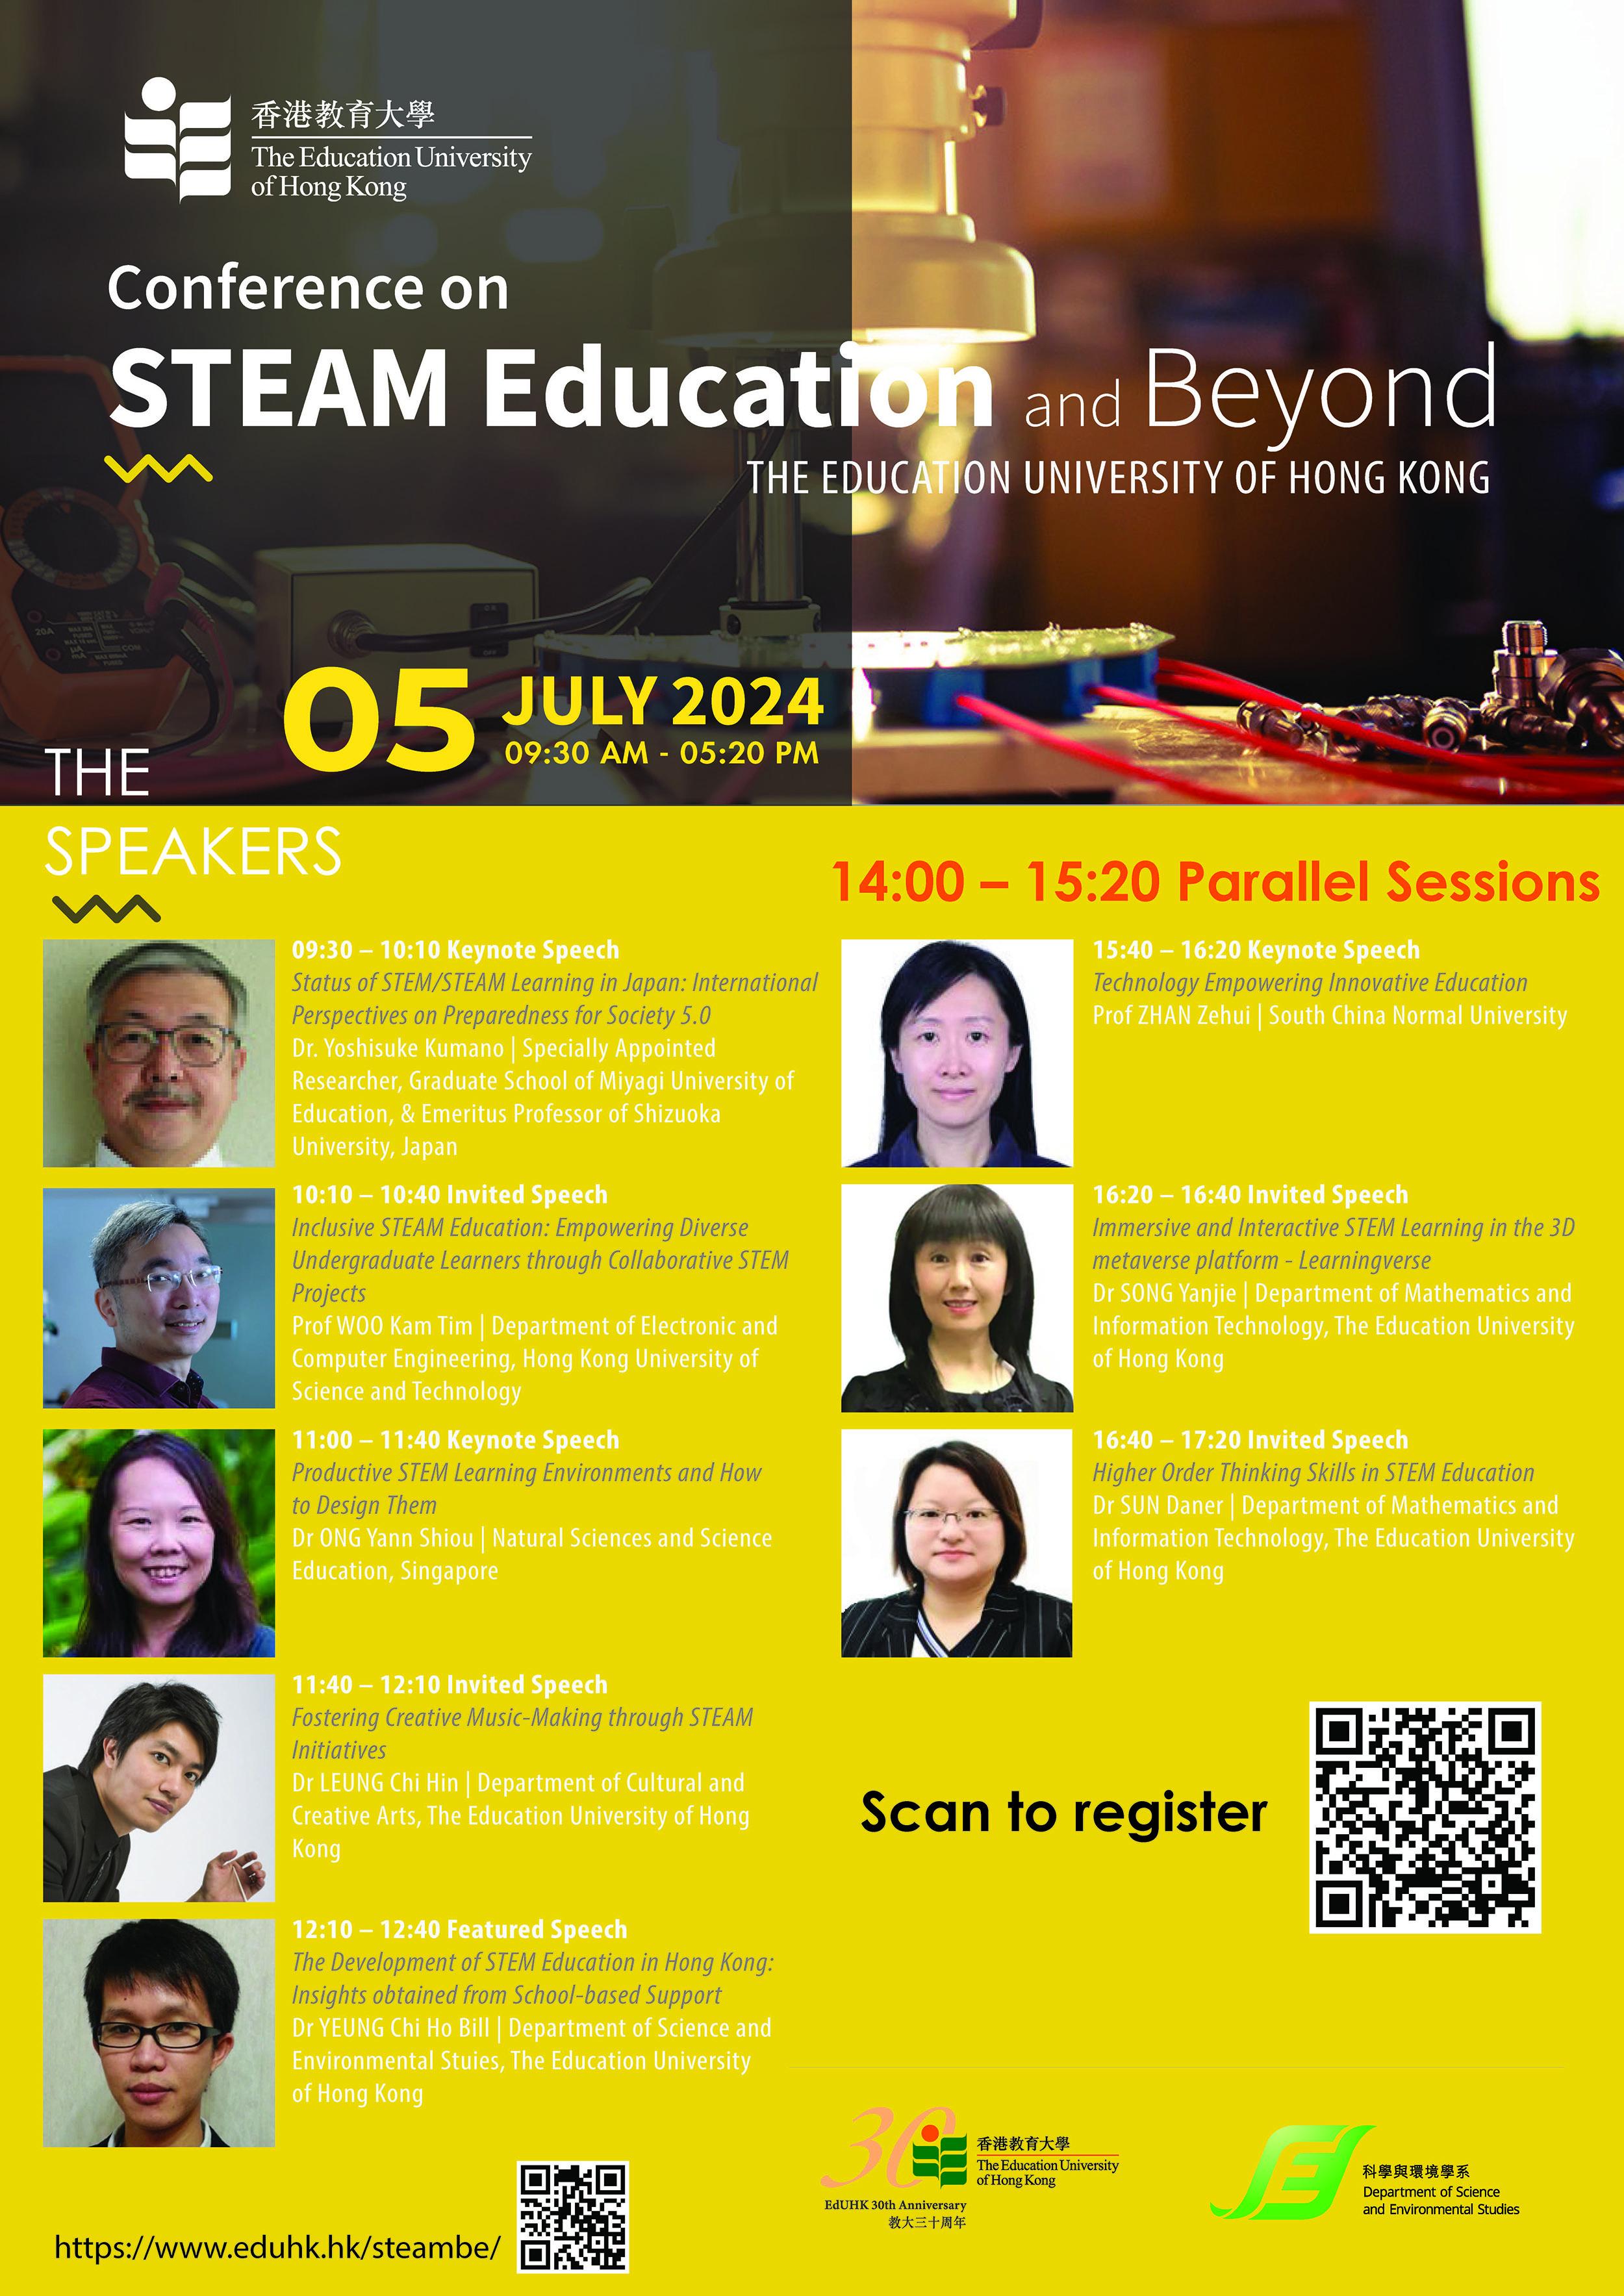  Conference on STEAM Education and Beyond